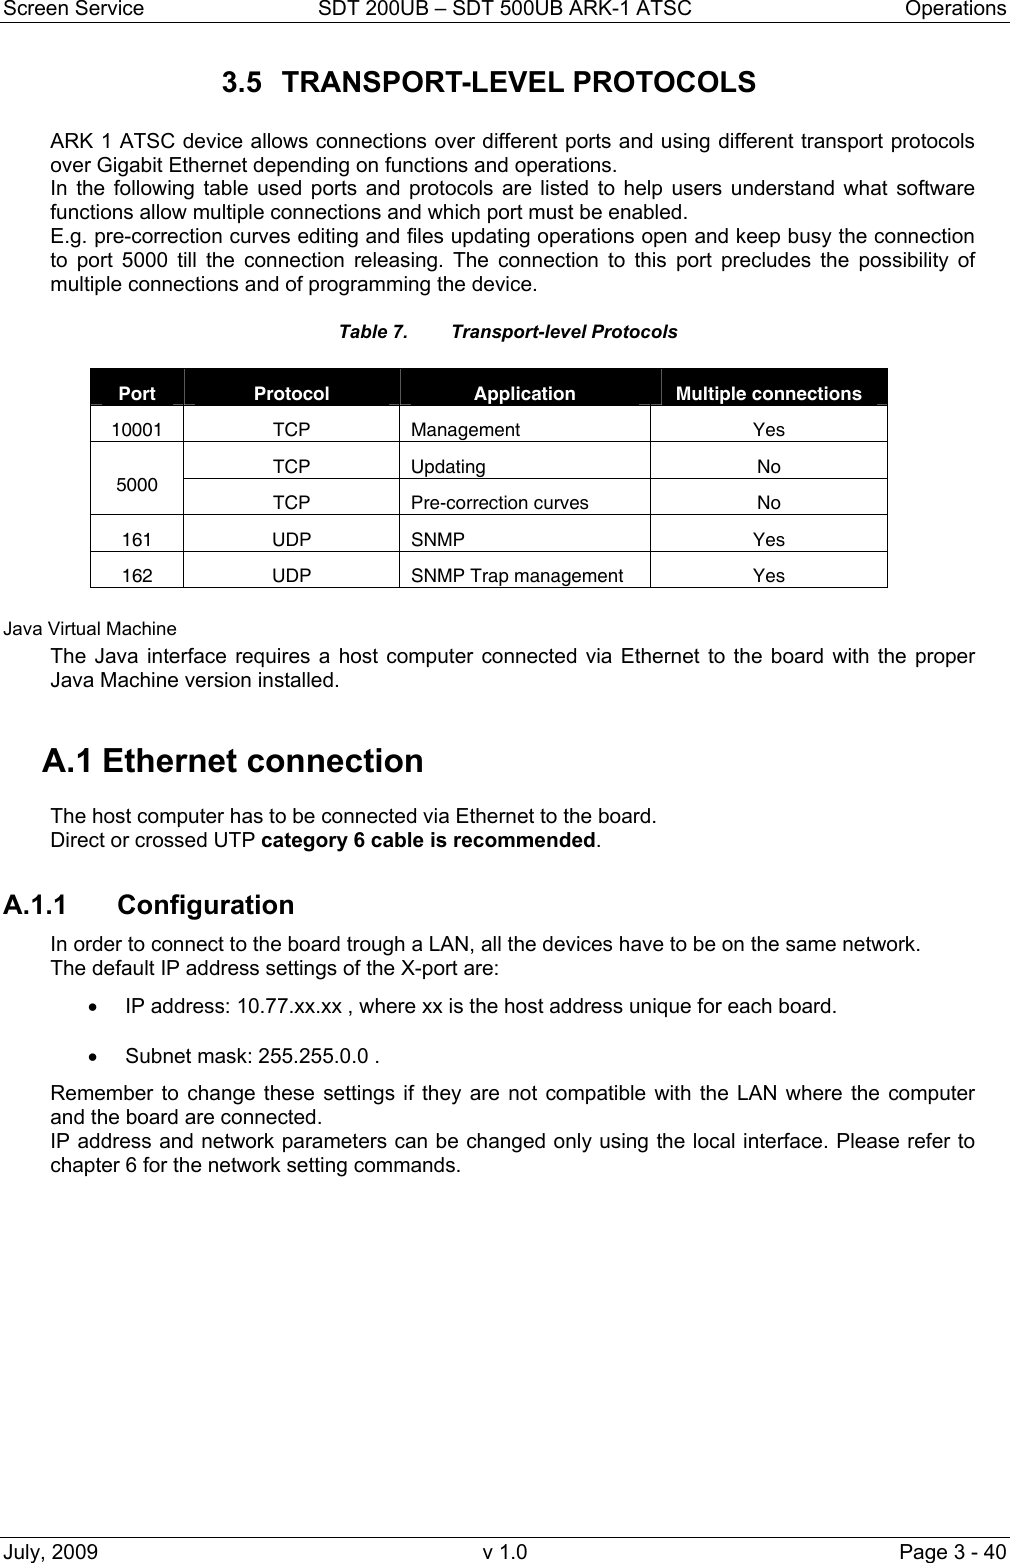 Screen Service  SDT 200UB – SDT 500UB ARK-1 ATSC  Operations July, 2009  v 1.0  Page 3 - 40 3.5 TRANSPORT-LEVEL PROTOCOLS  ARK 1 ATSC device allows connections over different ports and using different transport protocols over Gigabit Ethernet depending on functions and operations. In the following table used ports and protocols are listed to help users understand what software functions allow multiple connections and which port must be enabled. E.g. pre-correction curves editing and files updating operations open and keep busy the connection to port 5000 till the connection releasing. The connection to this port precludes the possibility of multiple connections and of programming the device. Table 7.  Transport-level Protocols Port  Protocol  Application  Multiple connections 10001 TCP Management  Yes TCP Updating  No 5000 TCP Pre-correction curves  No 161 UDP SNMP  Yes 162  UDP  SNMP Trap management  Yes  Java Virtual Machine The Java interface requires a host computer connected via Ethernet to the board with the proper Java Machine version installed.  A.1 Ethernet connection The host computer has to be connected via Ethernet to the board. Direct or crossed UTP category 6 cable is recommended.  A.1.1 Configuration In order to connect to the board trough a LAN, all the devices have to be on the same network.  The default IP address settings of the X-port are: •  IP address: 10.77.xx.xx , where xx is the host address unique for each board. •  Subnet mask: 255.255.0.0 . Remember to change these settings if they are not compatible with the LAN where the computer and the board are connected. IP address and network parameters can be changed only using the local interface. Please refer to chapter 6 for the network setting commands.              